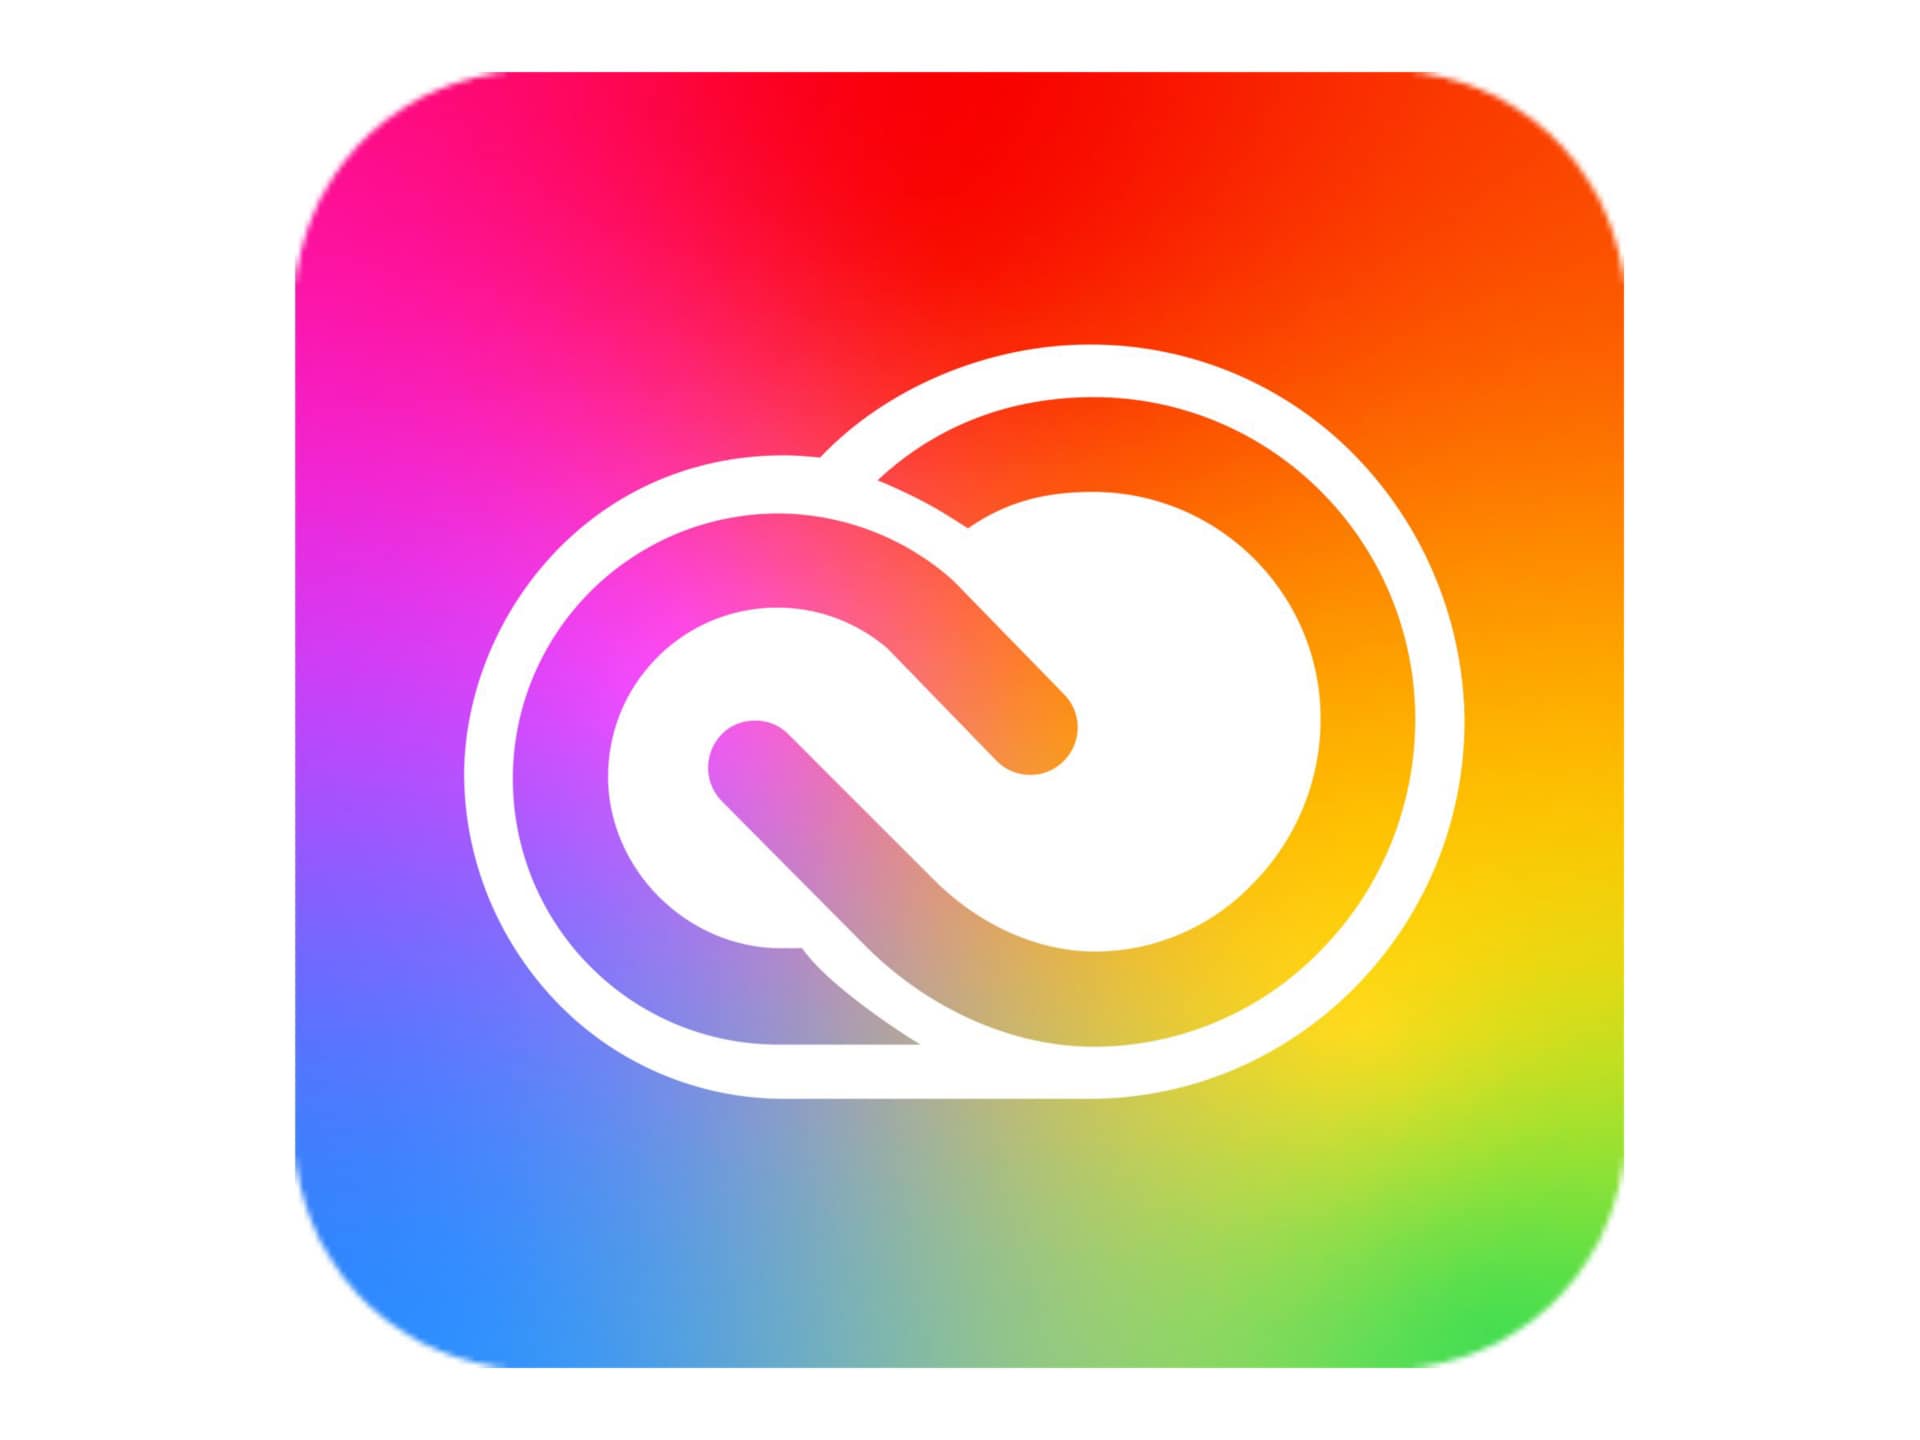 Adobe Creative Cloud for Enterprise - All Apps - Subscription New (45 month